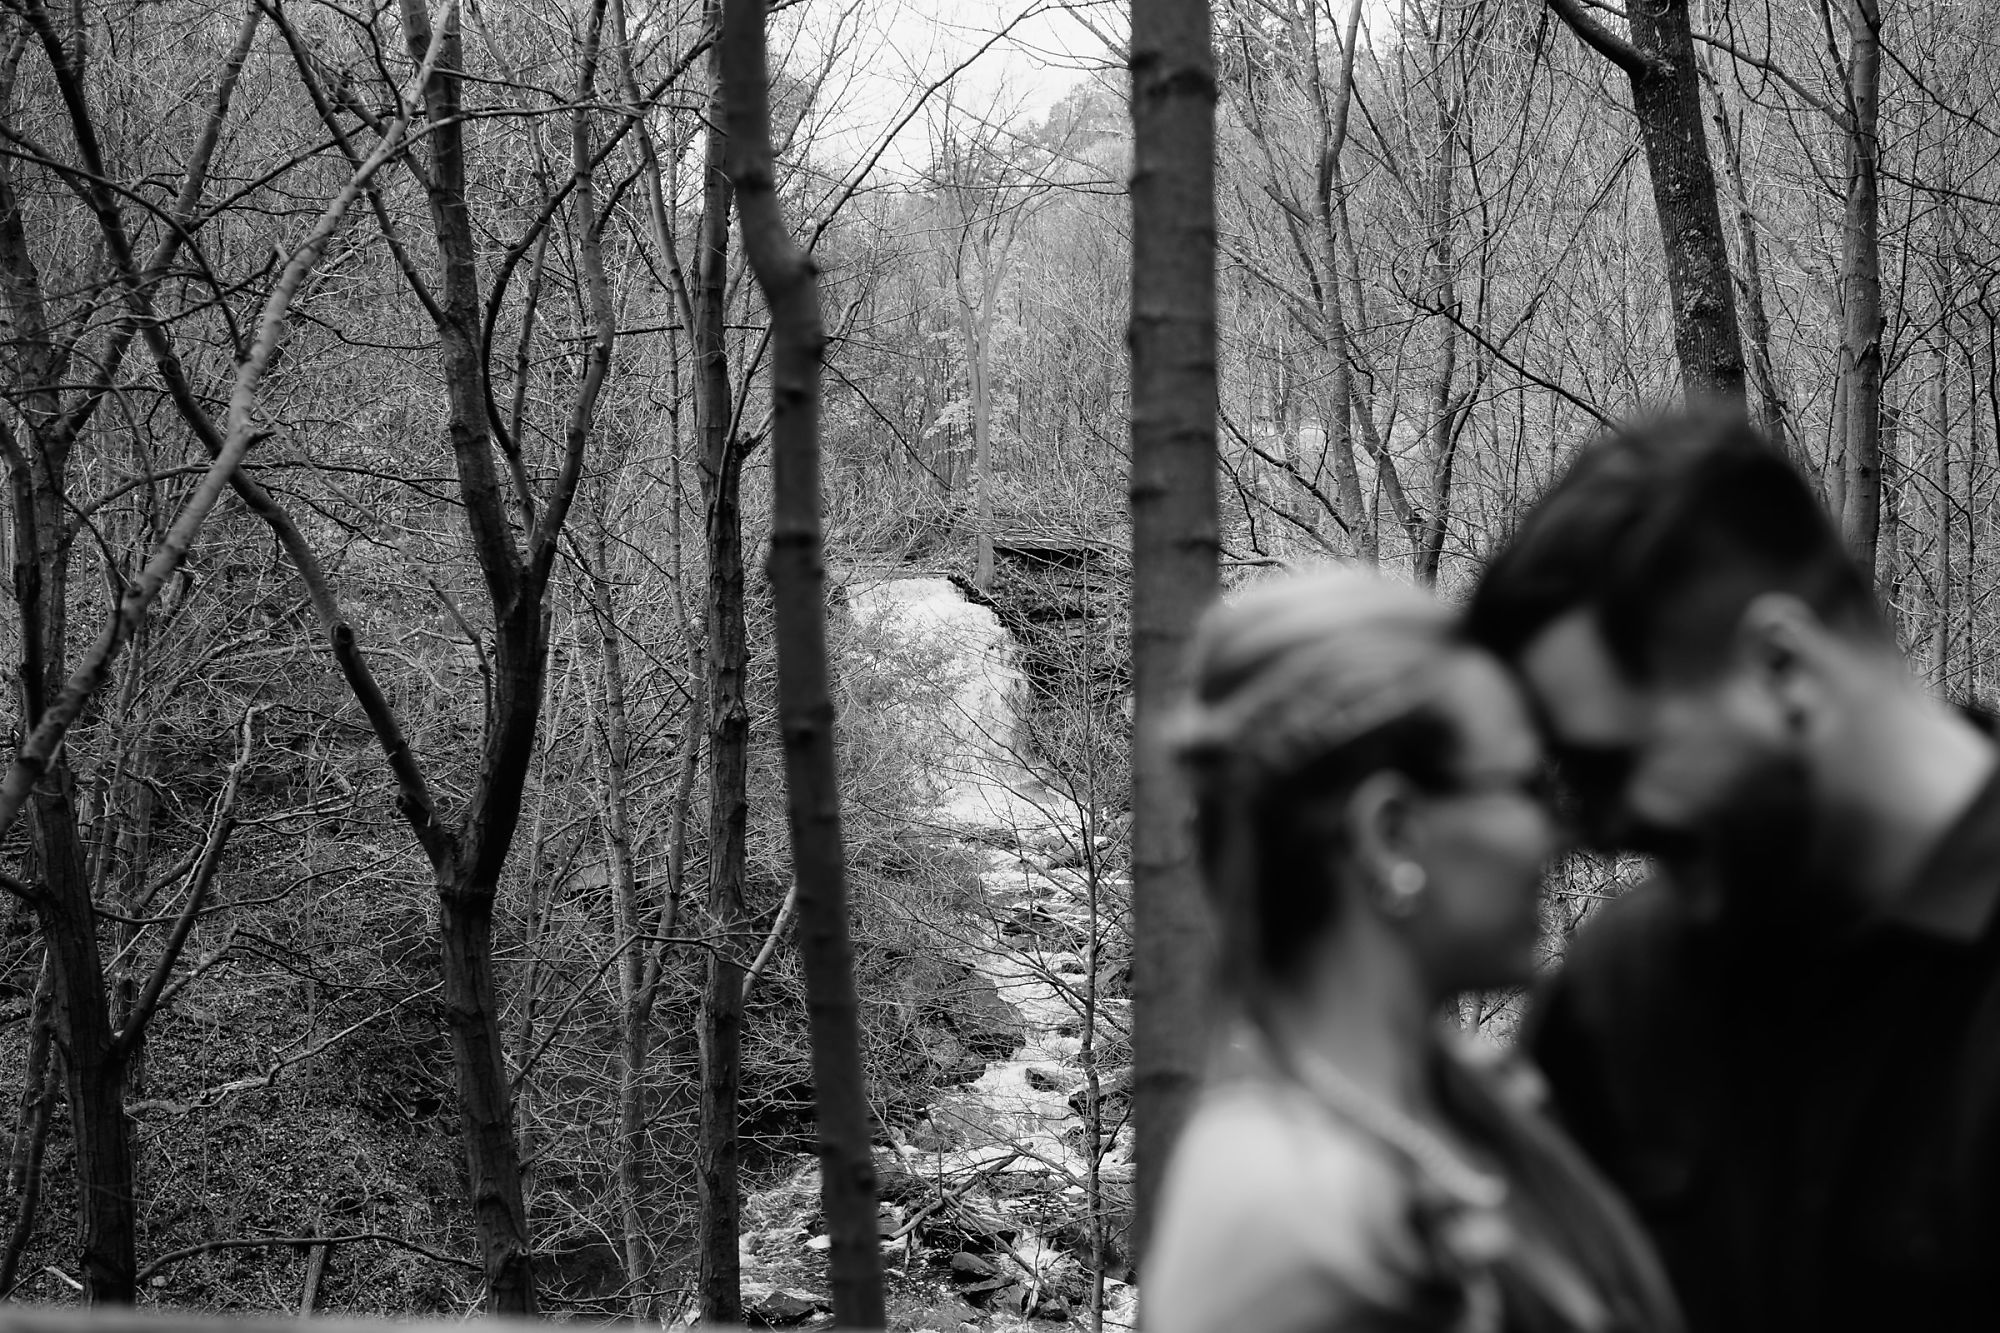 Artistic waterfall shot with couple Dan and Nina at Smokey Hollow Falls during their engagement session in Dundas Ontario with photographer Jennifer Blaak.